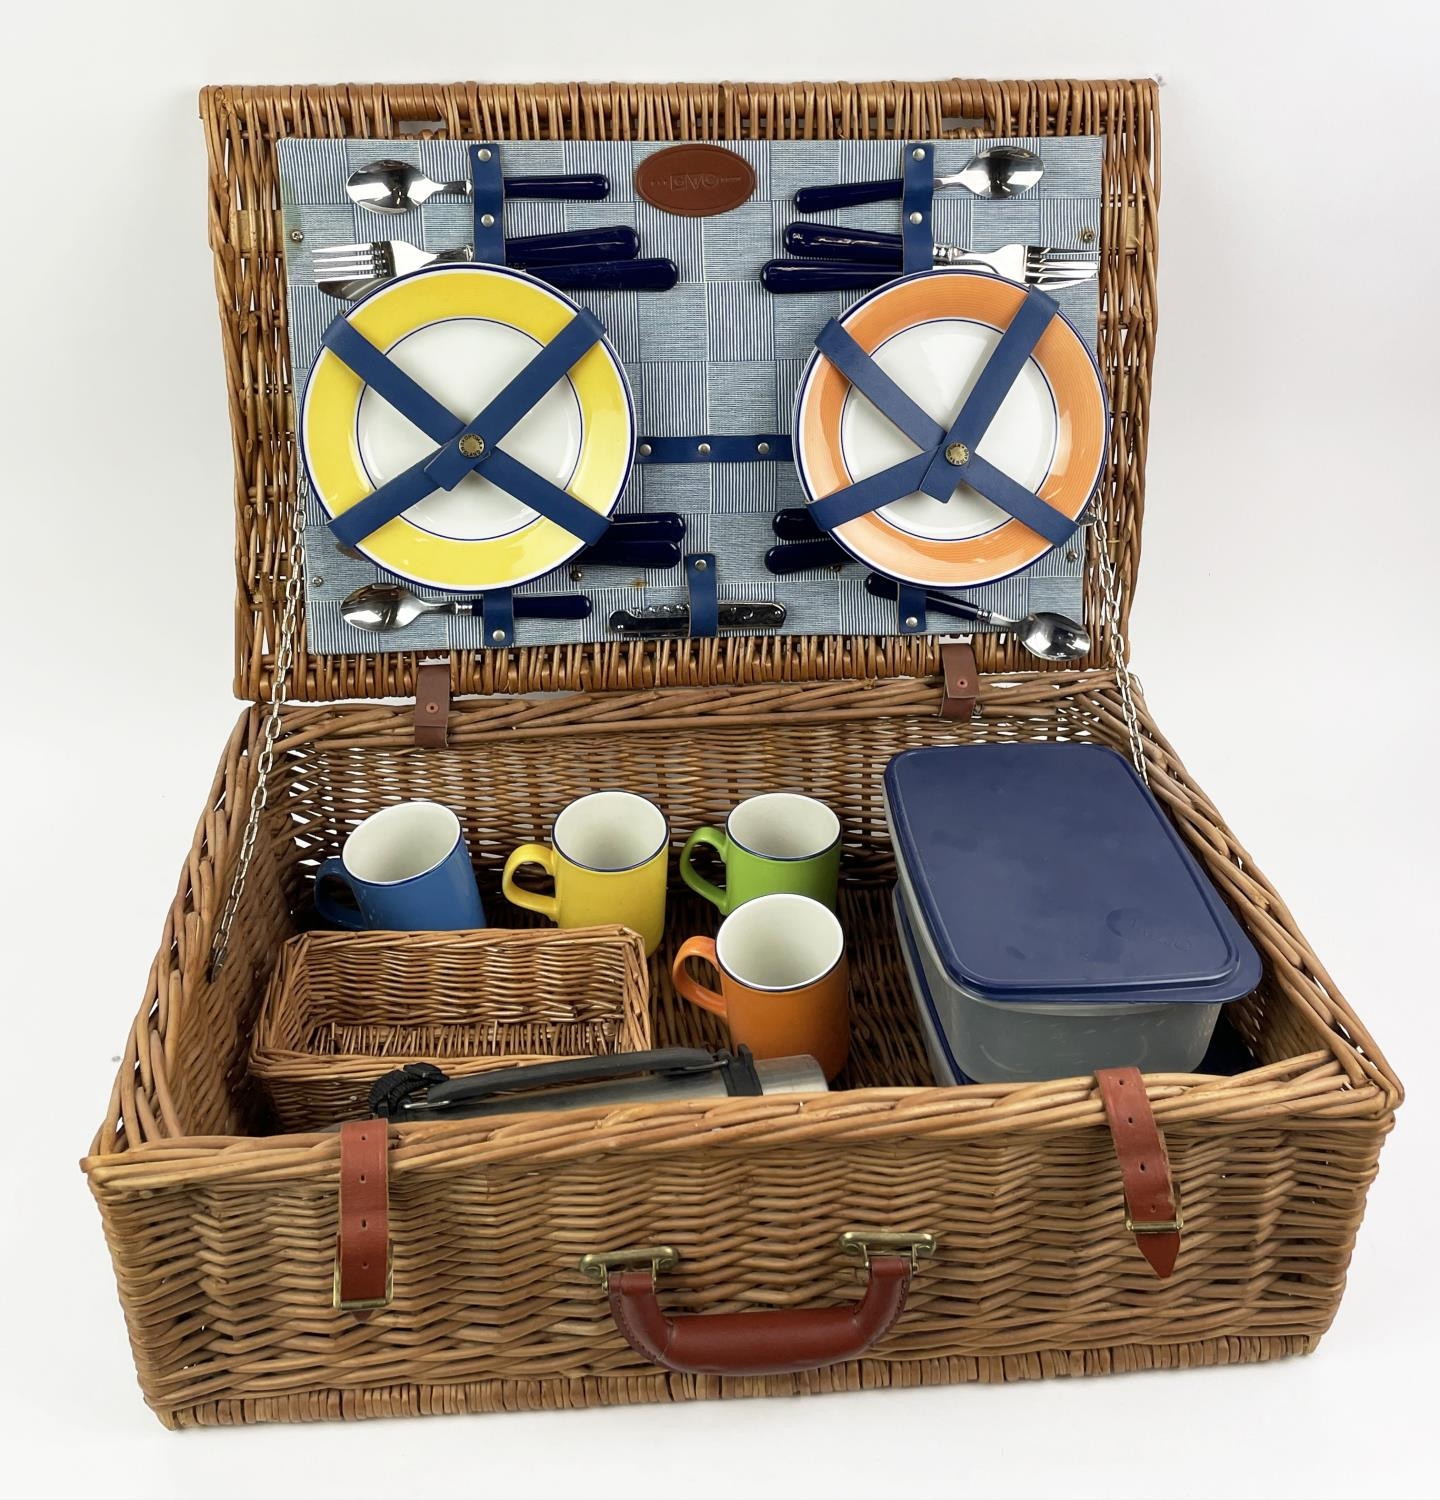 G.T.C. PICNIC BASKET, four place setting, including plates, cutlery, mugs, flask and tuperware in - Image 5 of 8